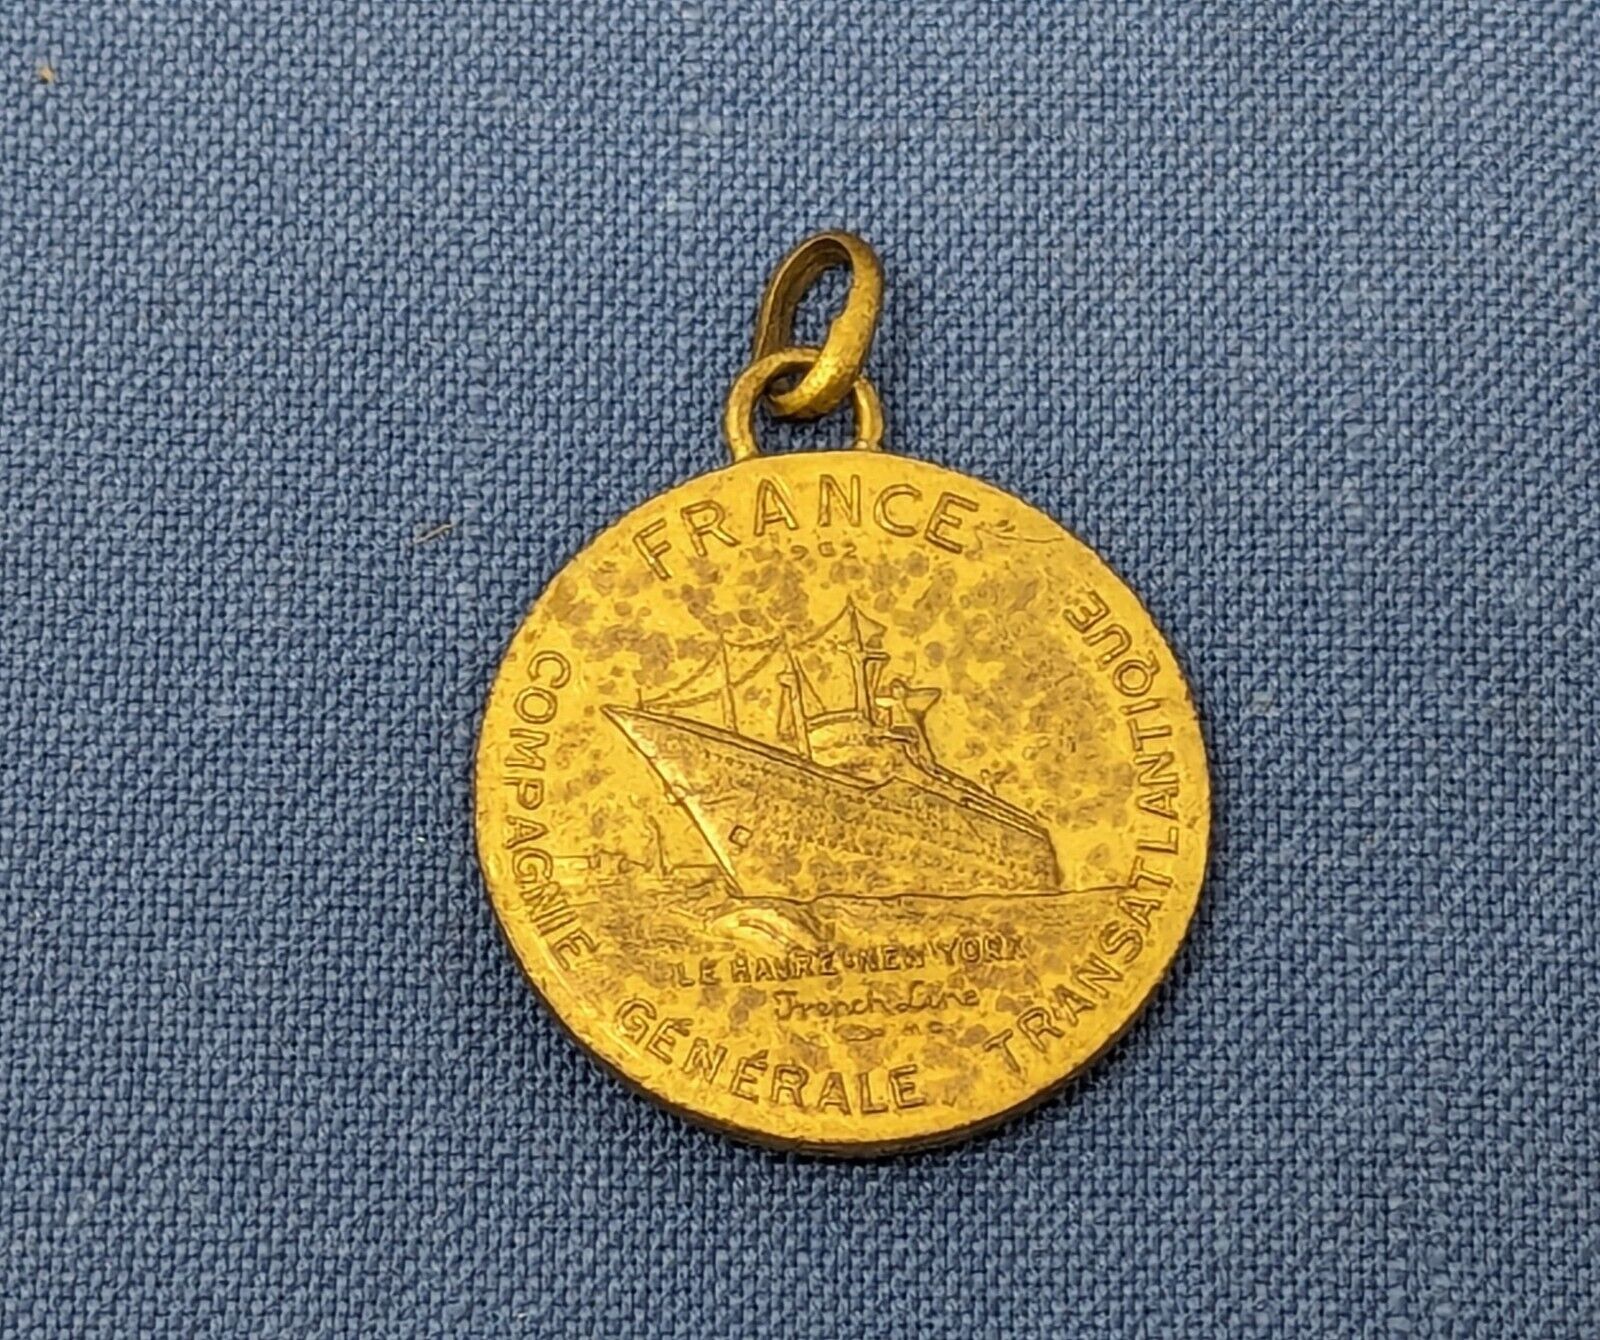 French Line S.S. FRANCE Gold-Wash Charm w/ Maiden Voyage Medallion Design